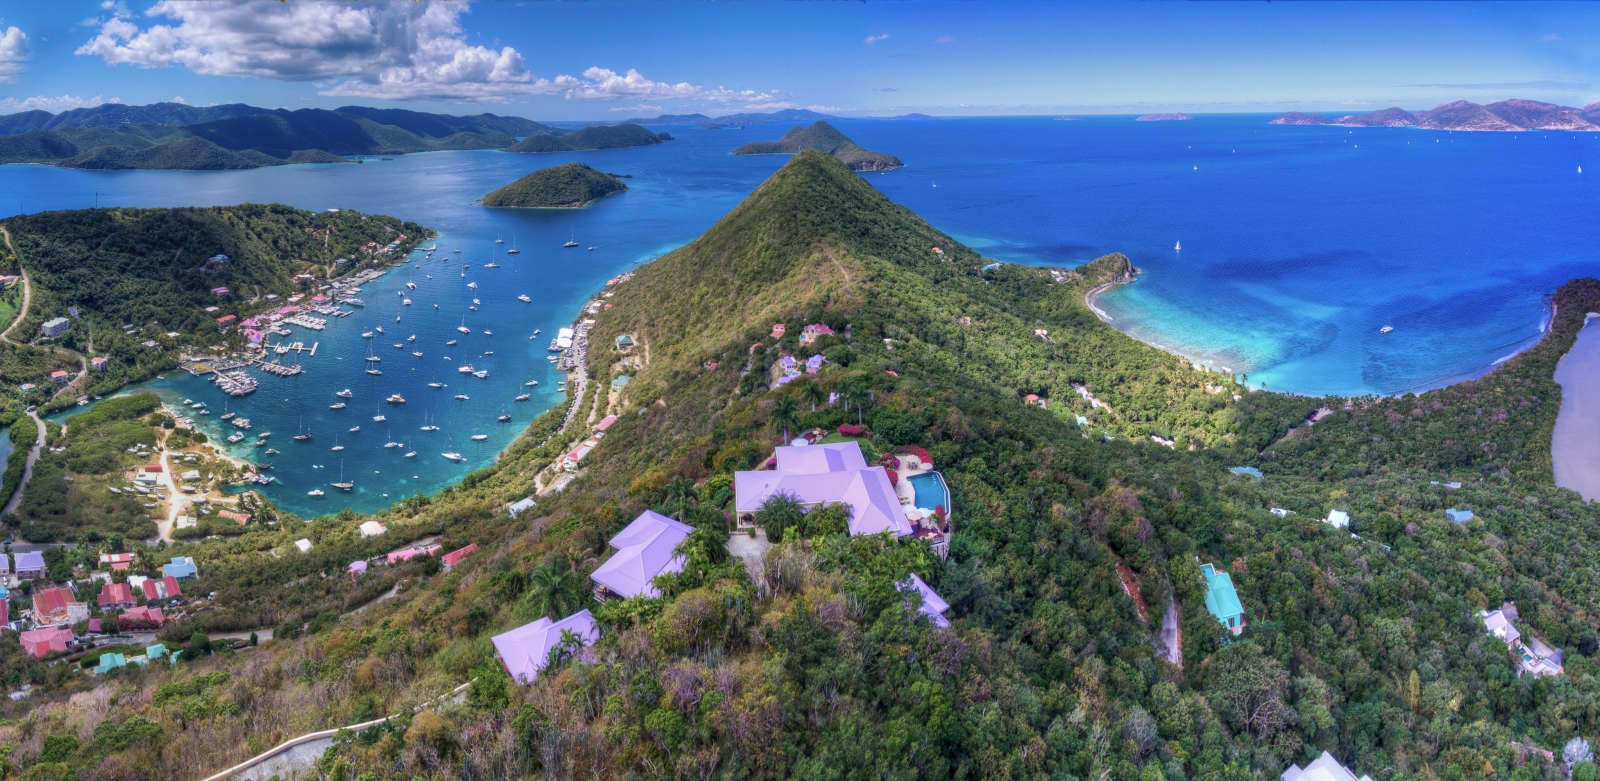 Aerial view of the peninsula on which sits ST Bernard's Hill House, luxury villa in the British Virgin Islands